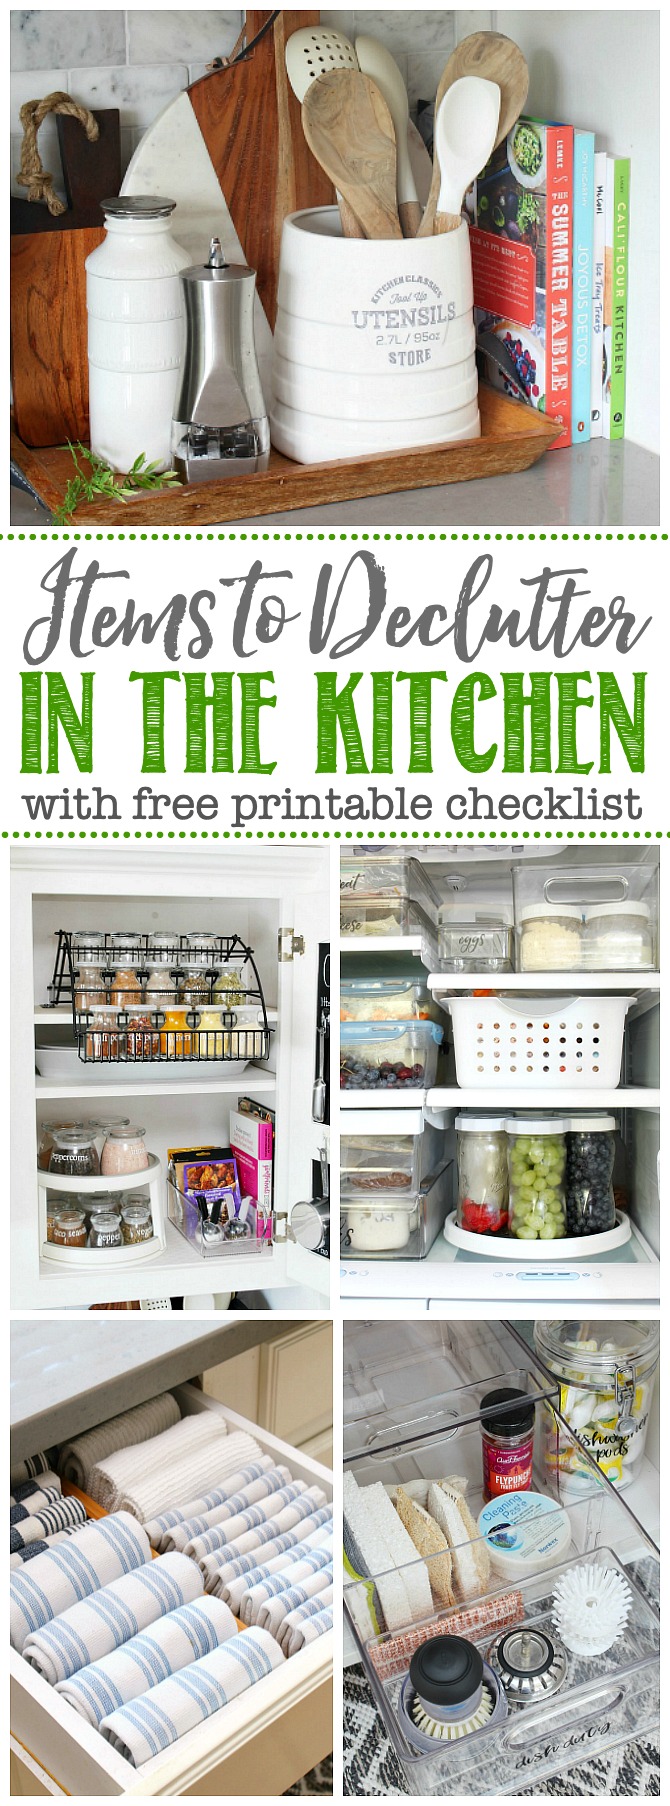 https://www.cleanandscentsible.com/wp-content/uploads/2020/07/Items-to-Declutter-in-the-Kitchen.jpg